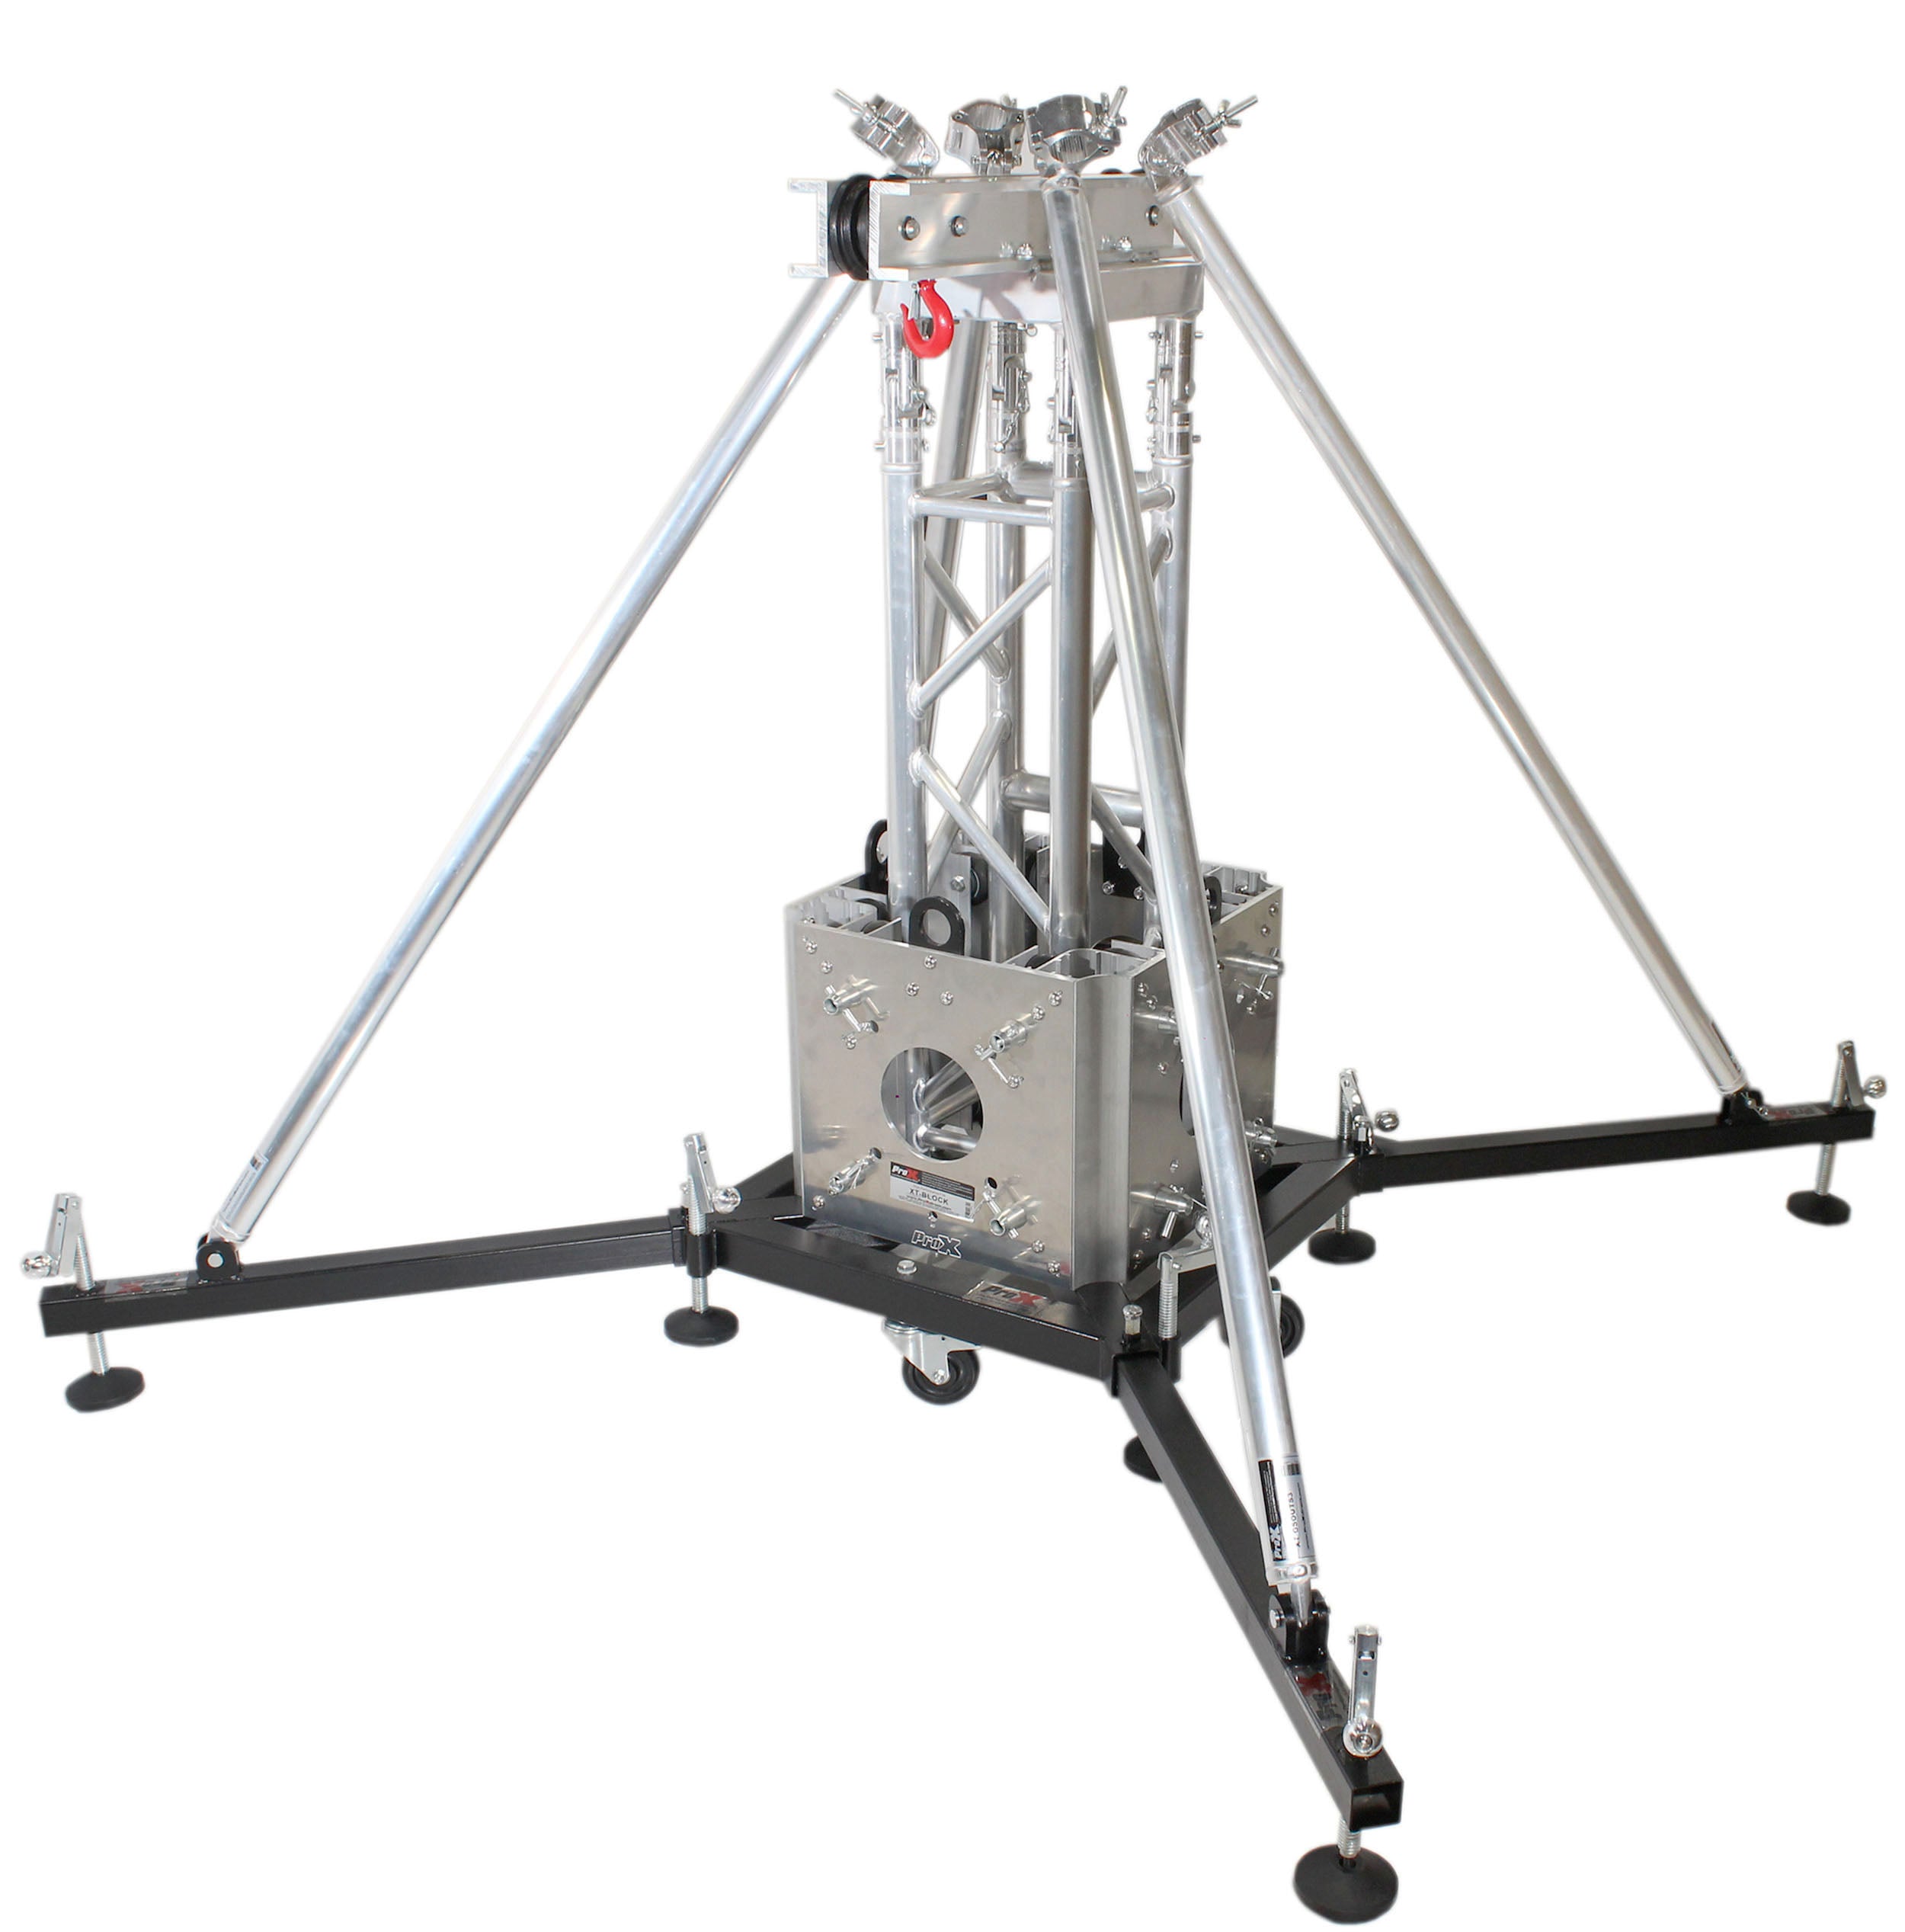 Pro X PRO Truss Tower Stage Lift System Package -Top Block | Hinges | Base | Outriggers and 3.28 Ft. 3 mm Ladder Truss Segment XTP-GSBPACK3 PRO